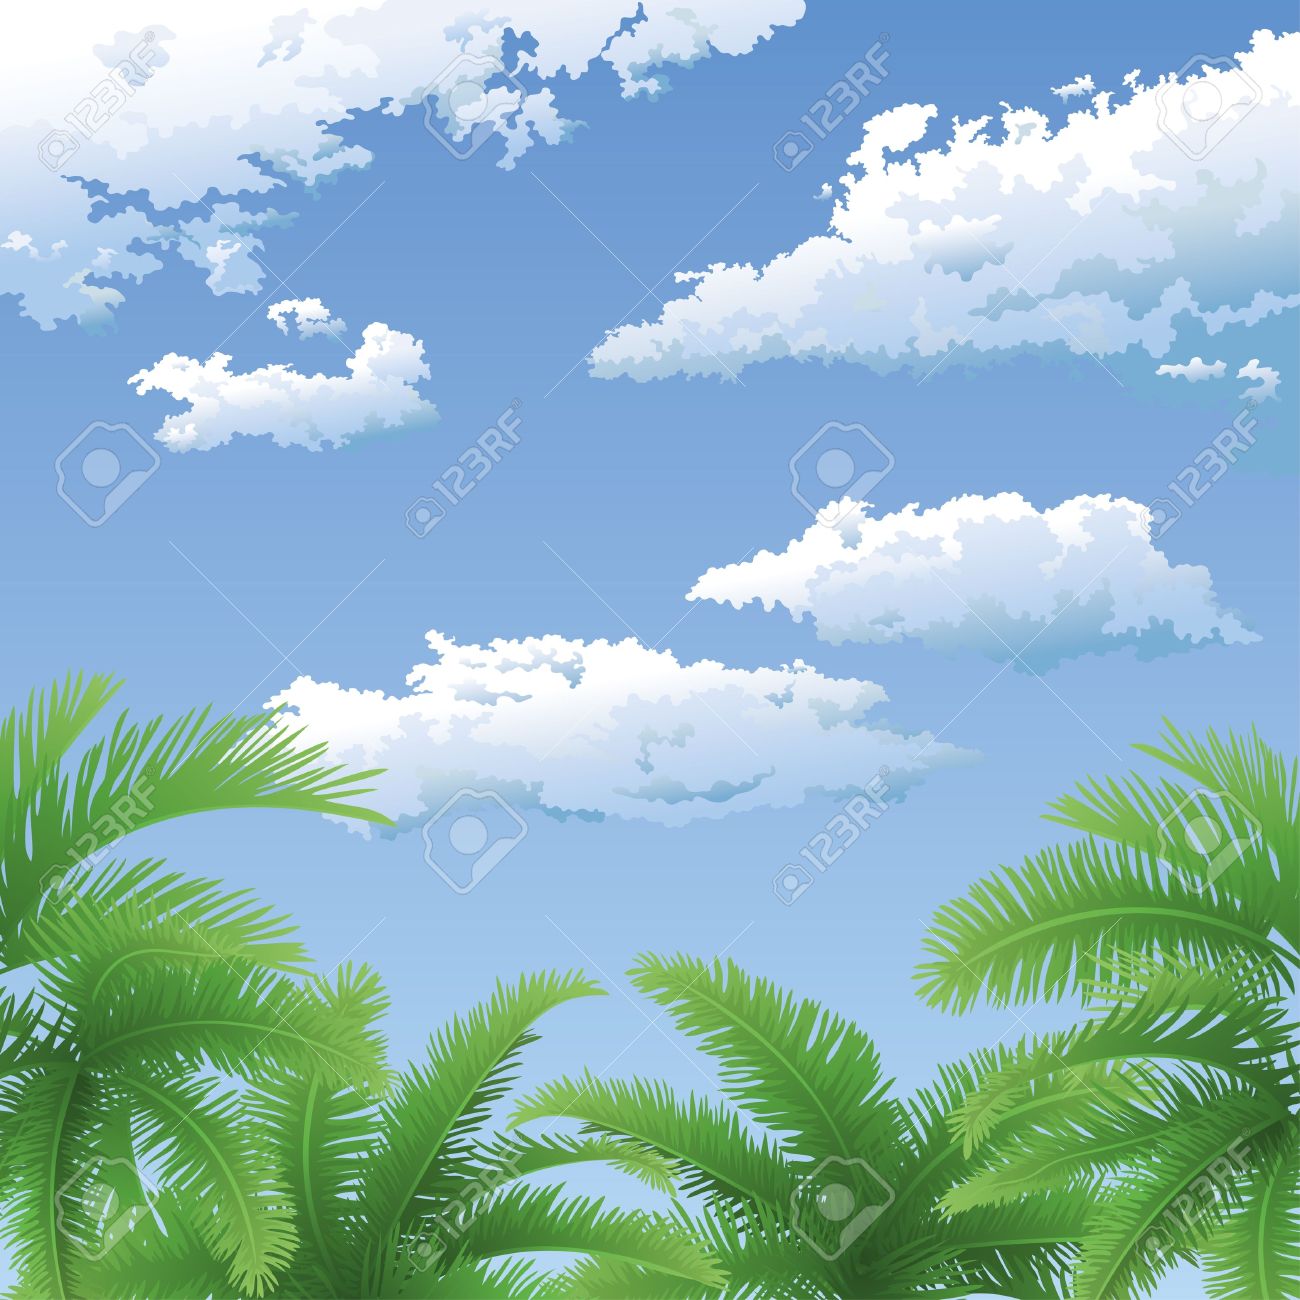 Palm Trees And Sky Background Clipart.